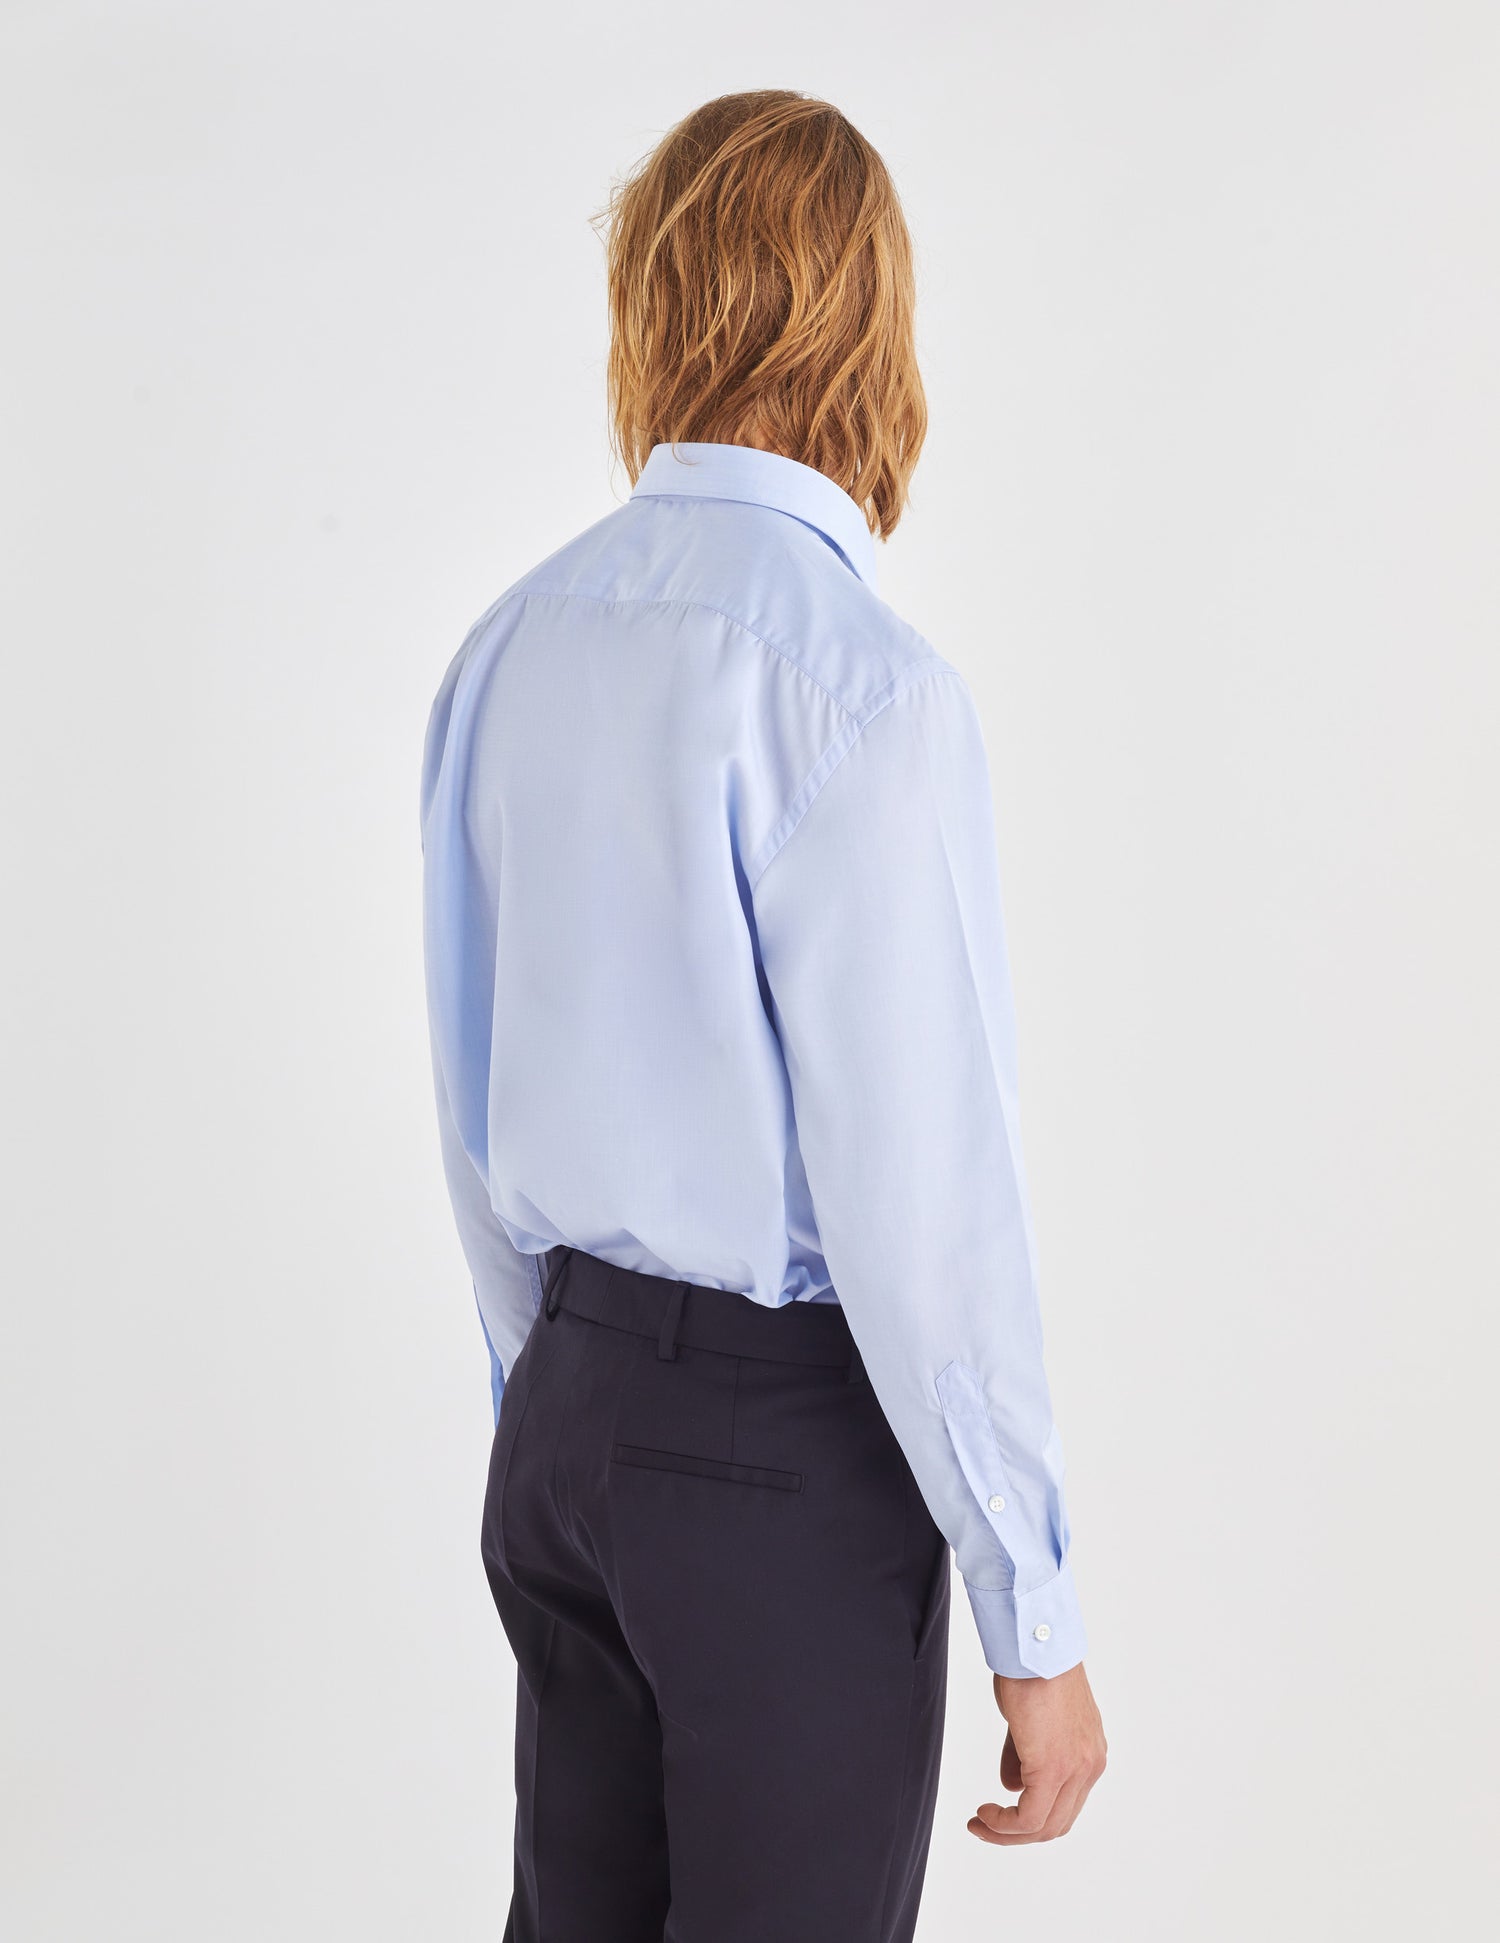 Classic blue wrinkle-free shirt - Wire to wire - Figaret Collar#3